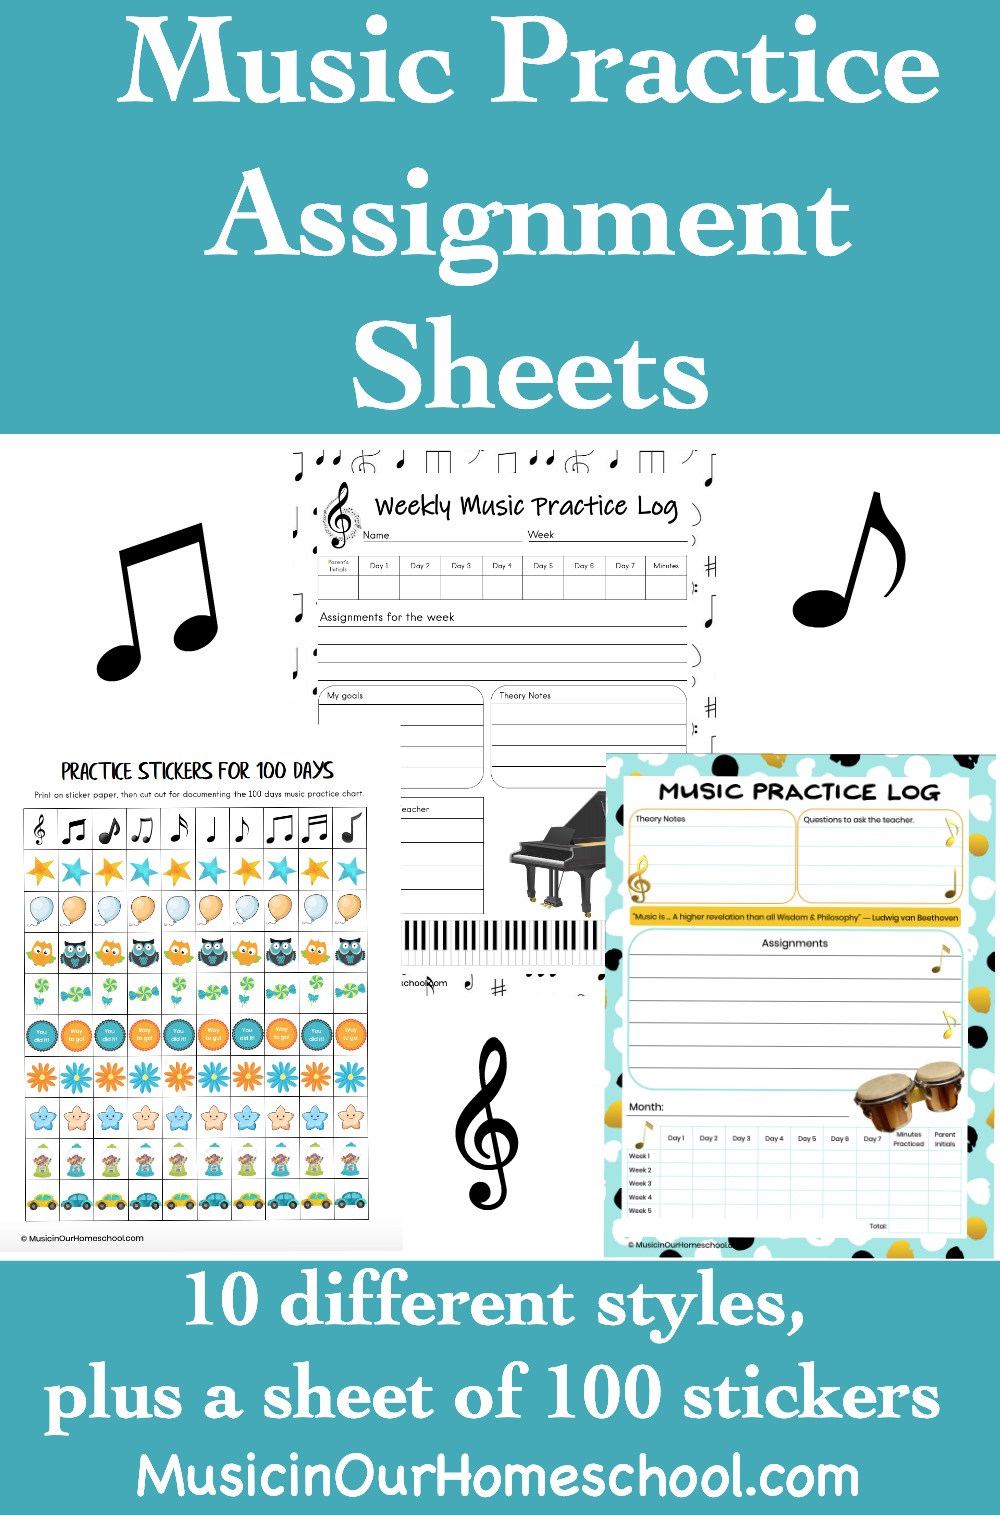 Find 10 beautiful and classy music practice assignment sheets that you can use to get your kids motivated to practice their instruments. The choices include monthly, weekly, and even a 100-day practice chart with a set of stickers to print for it. #musiclessons #musiclessonsforkids #instrumentpractice #pianolessons #musicprintables #ichoosejoyblog #musicinourhomeschool